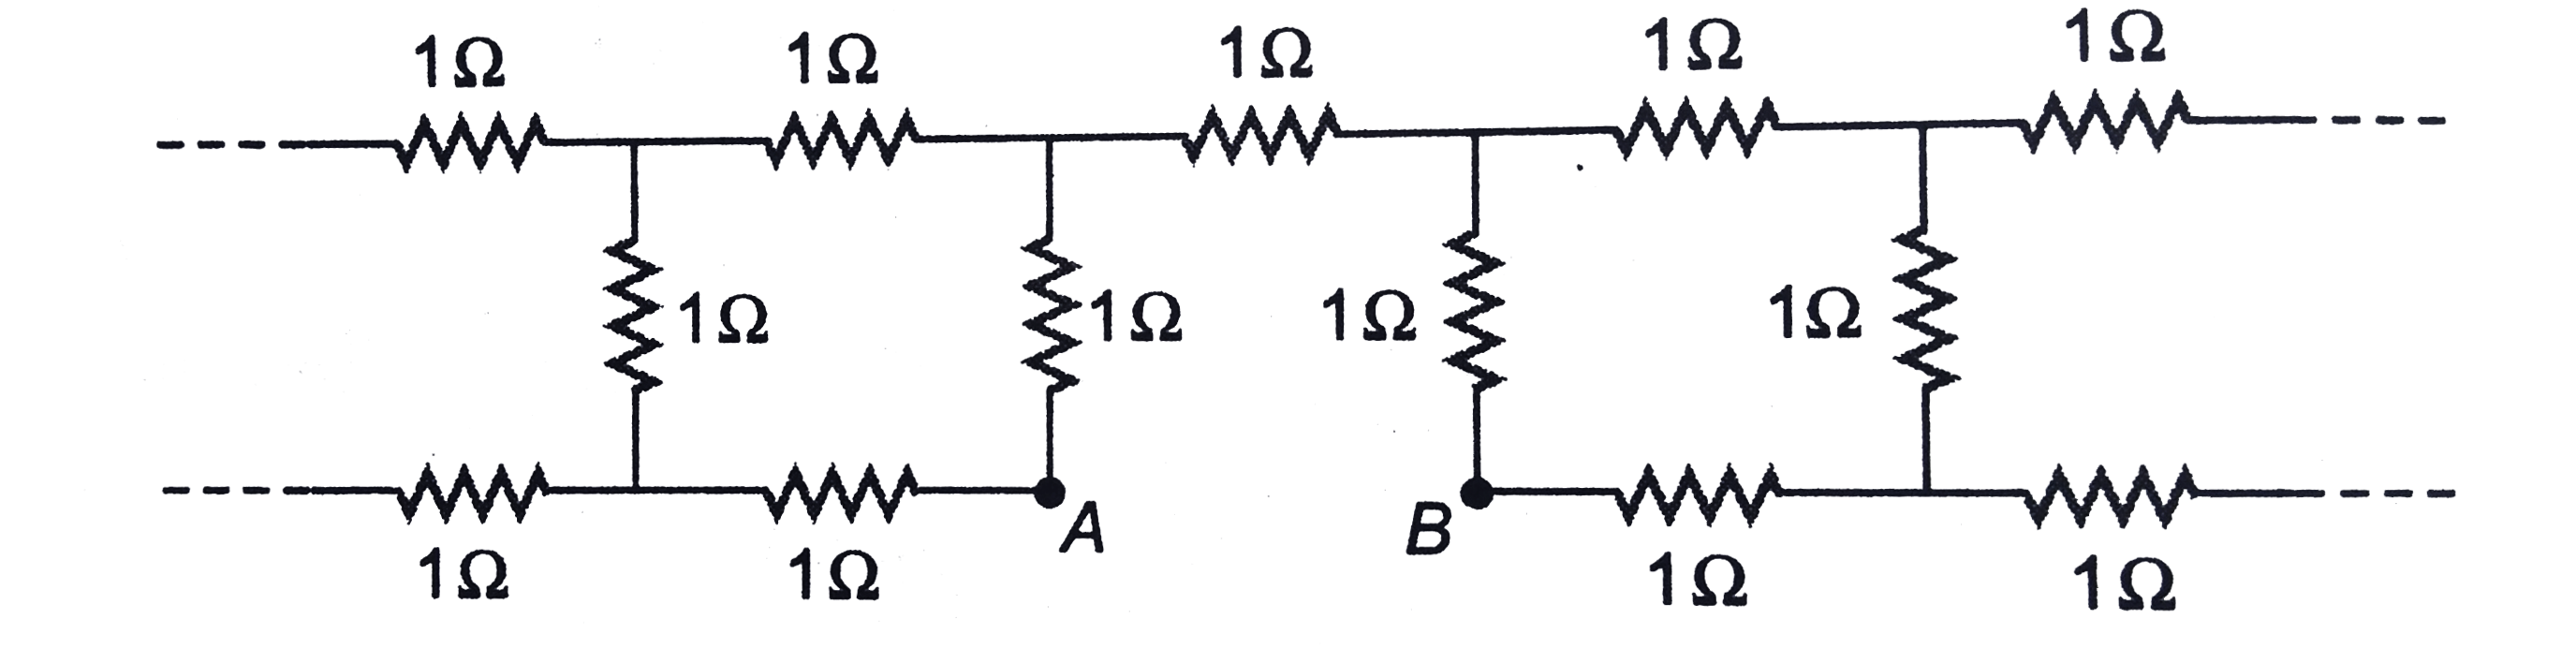 Each resistor shown in figure is an infinite network of resistance1Omega. The effective resistance Between points A and B is